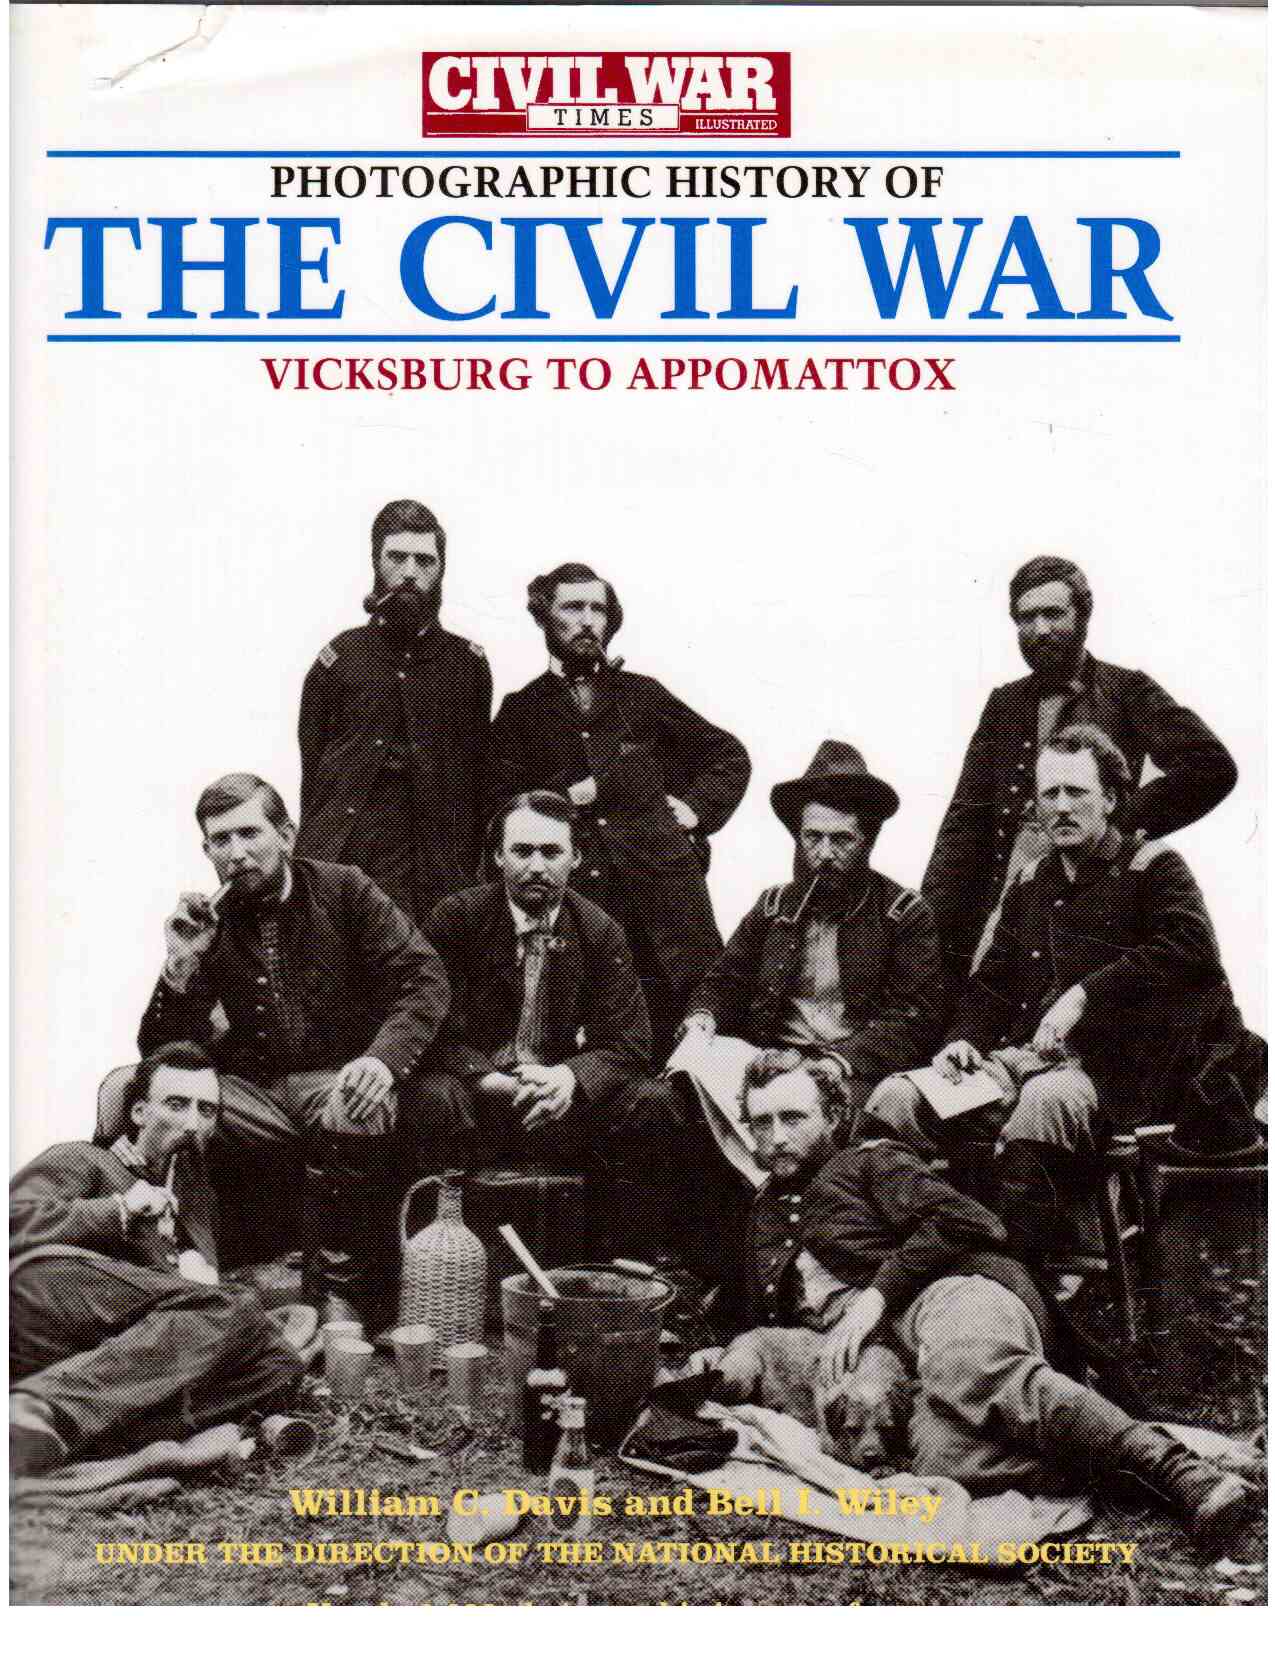 The Civil War Times Illustrated Photographic History of the Civil War, Volume II: Vicksburg to Appomattox (Civil War Times Illustrated the Civil War)